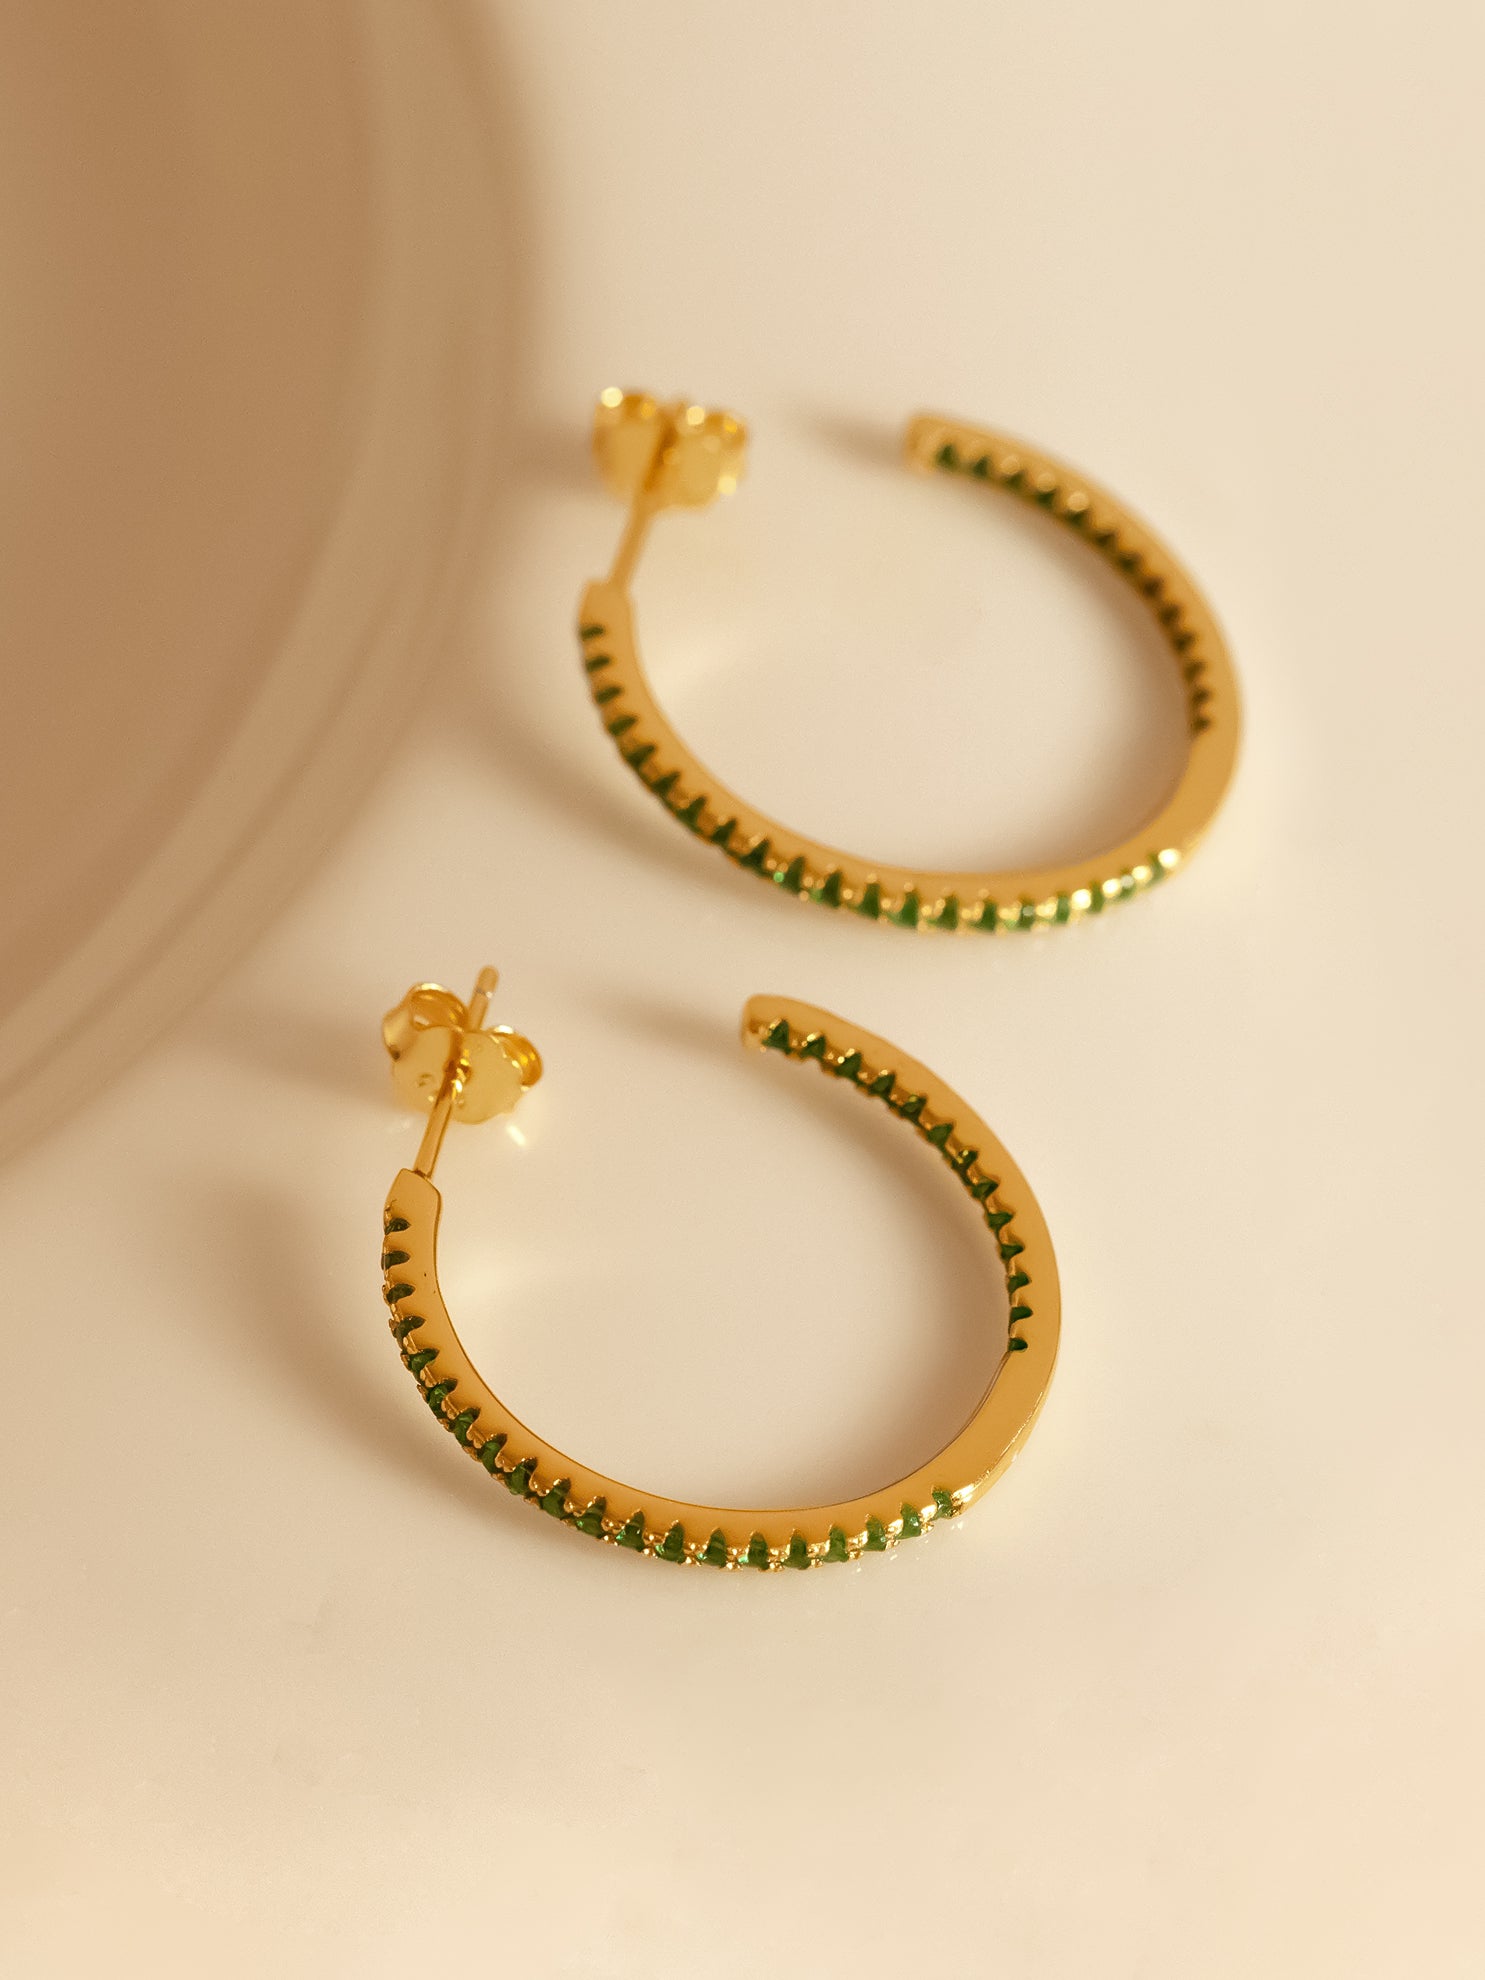 Gold Thin Hoop Earrings With Emerald Green Stones